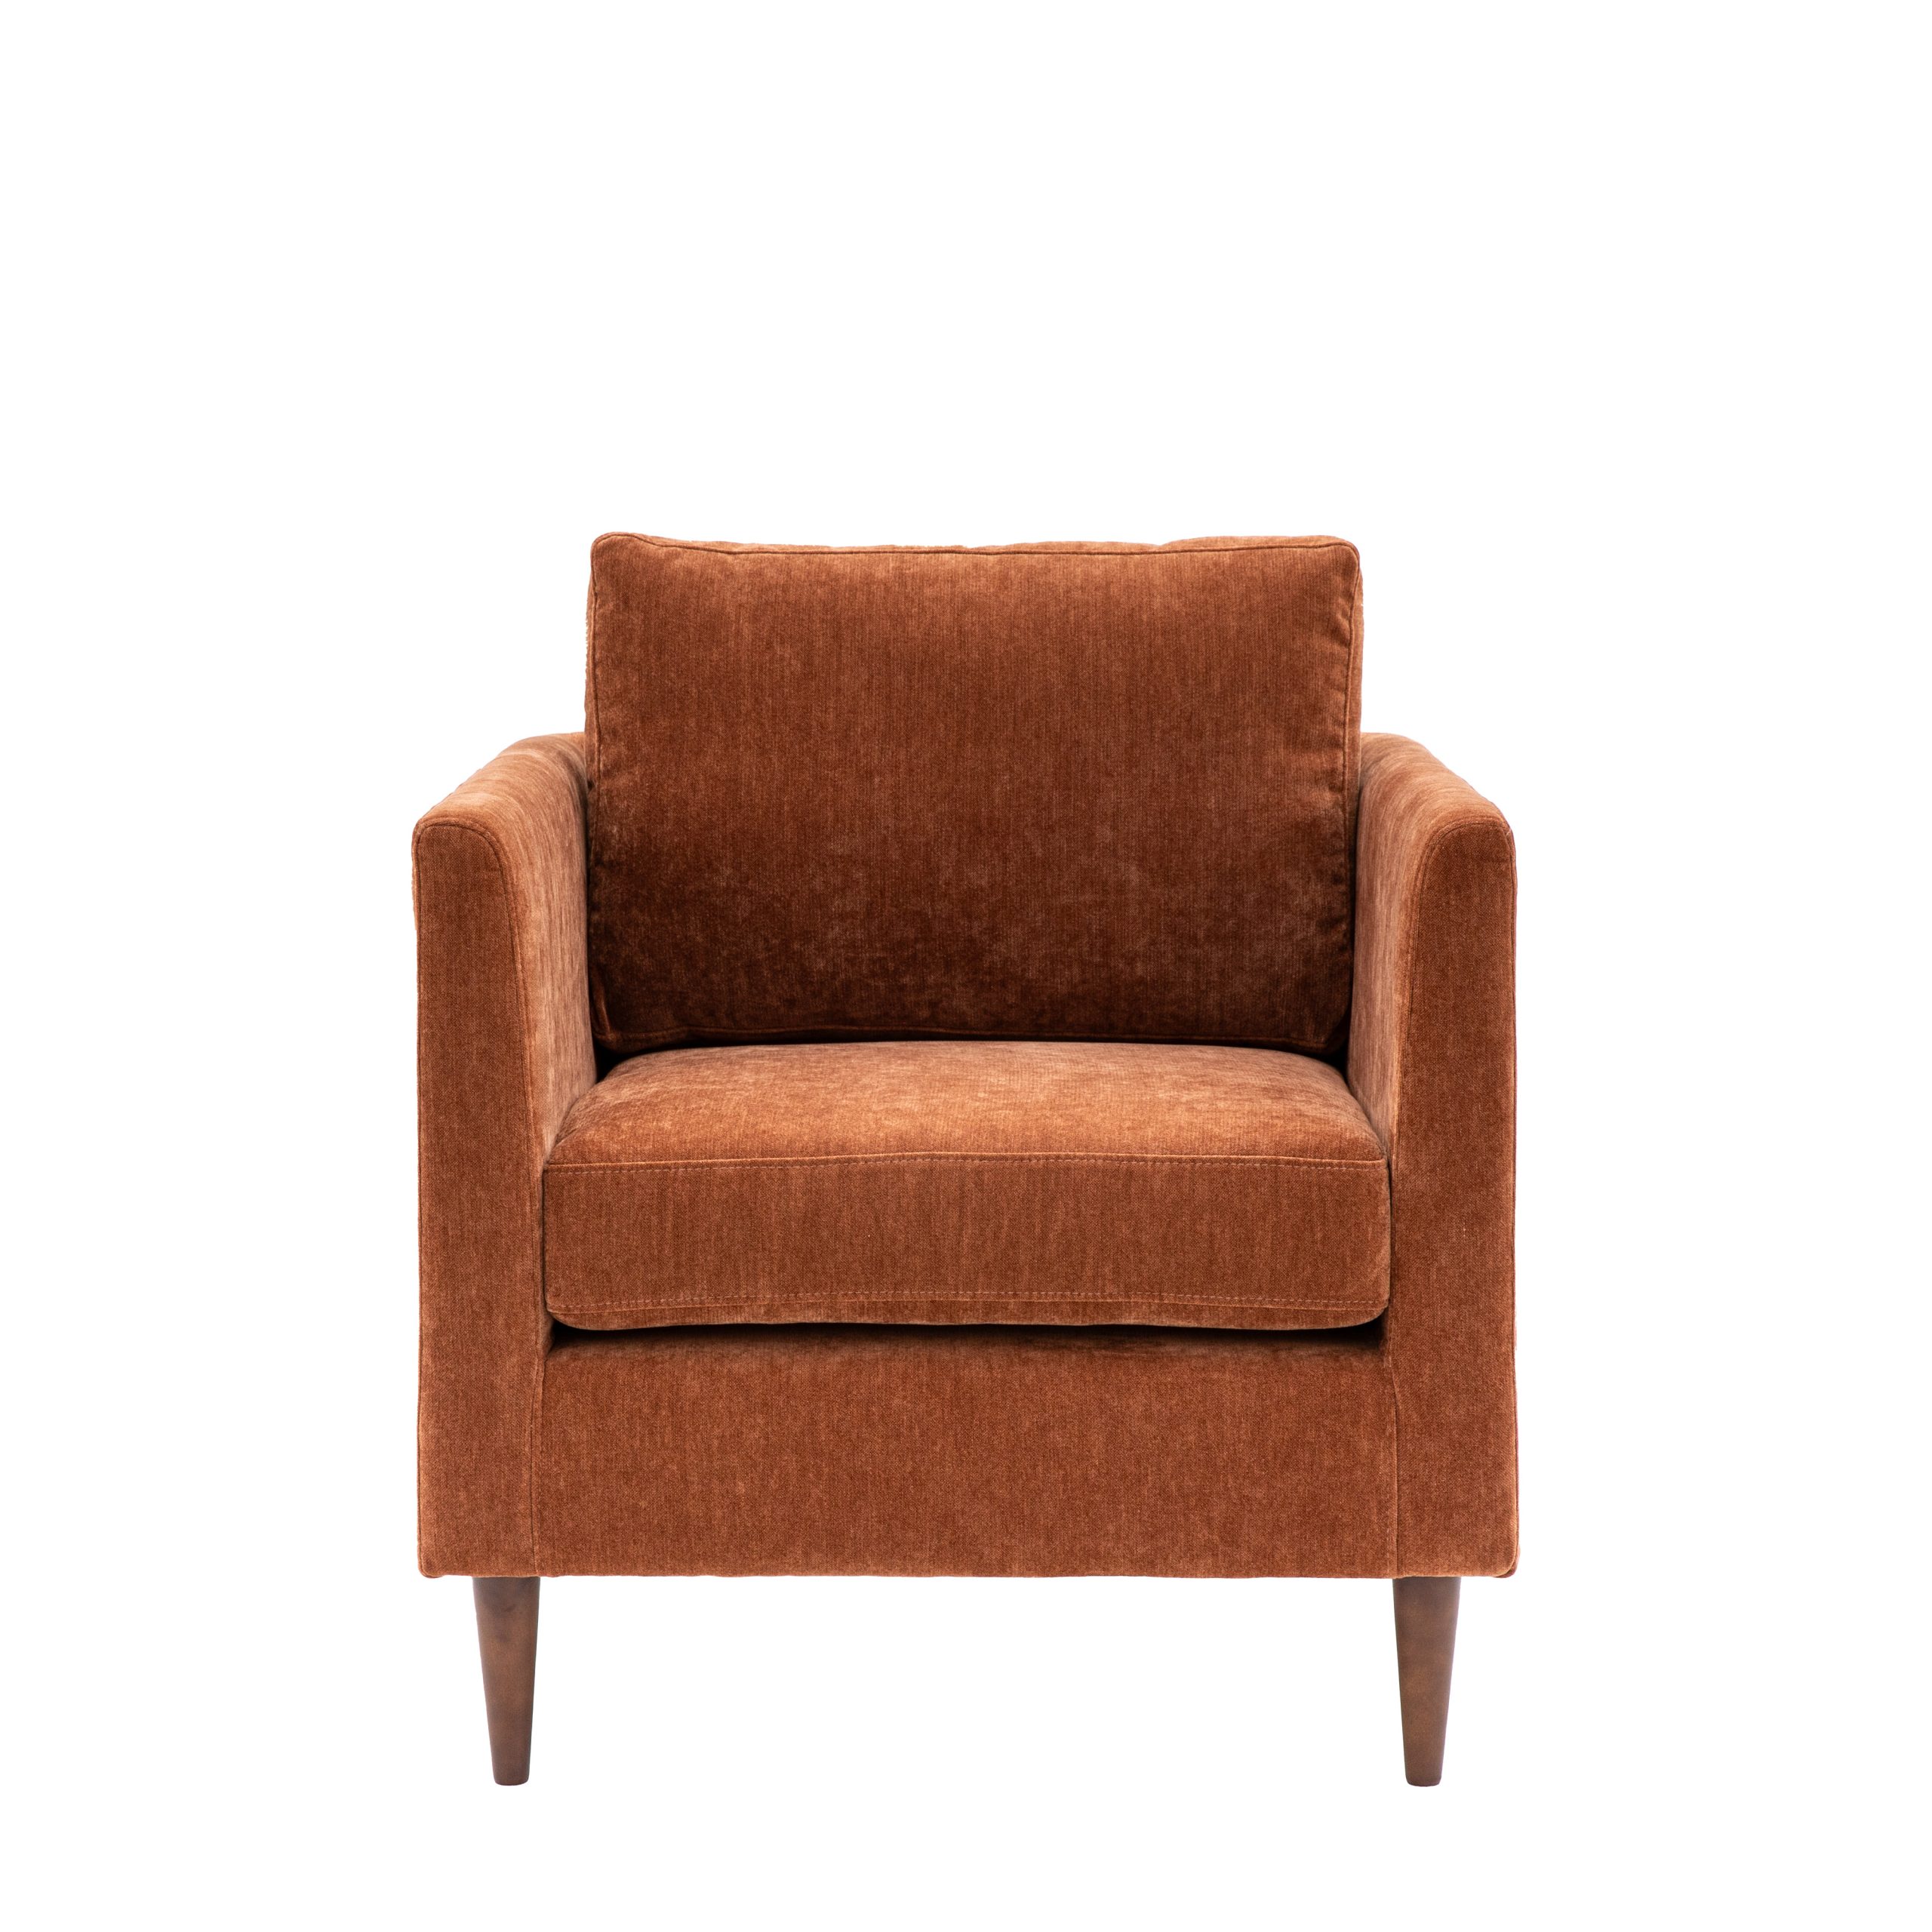 Gallery Direct Gateford Armchair Rust